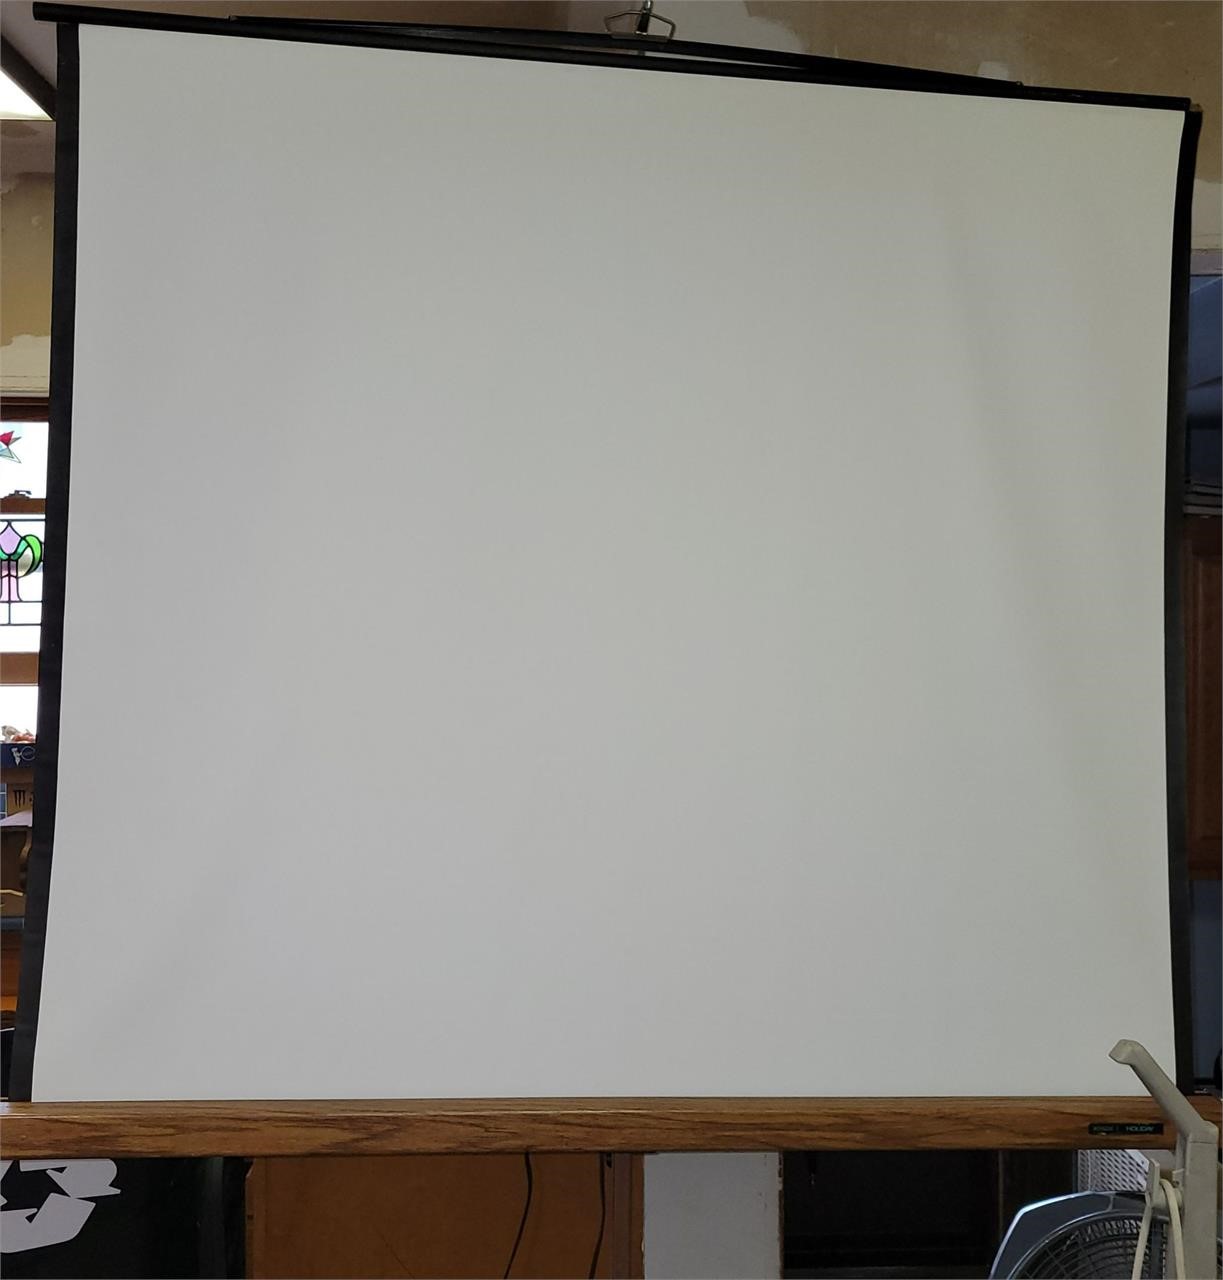 Knox/Holiday Projector Screen 55" x 59"